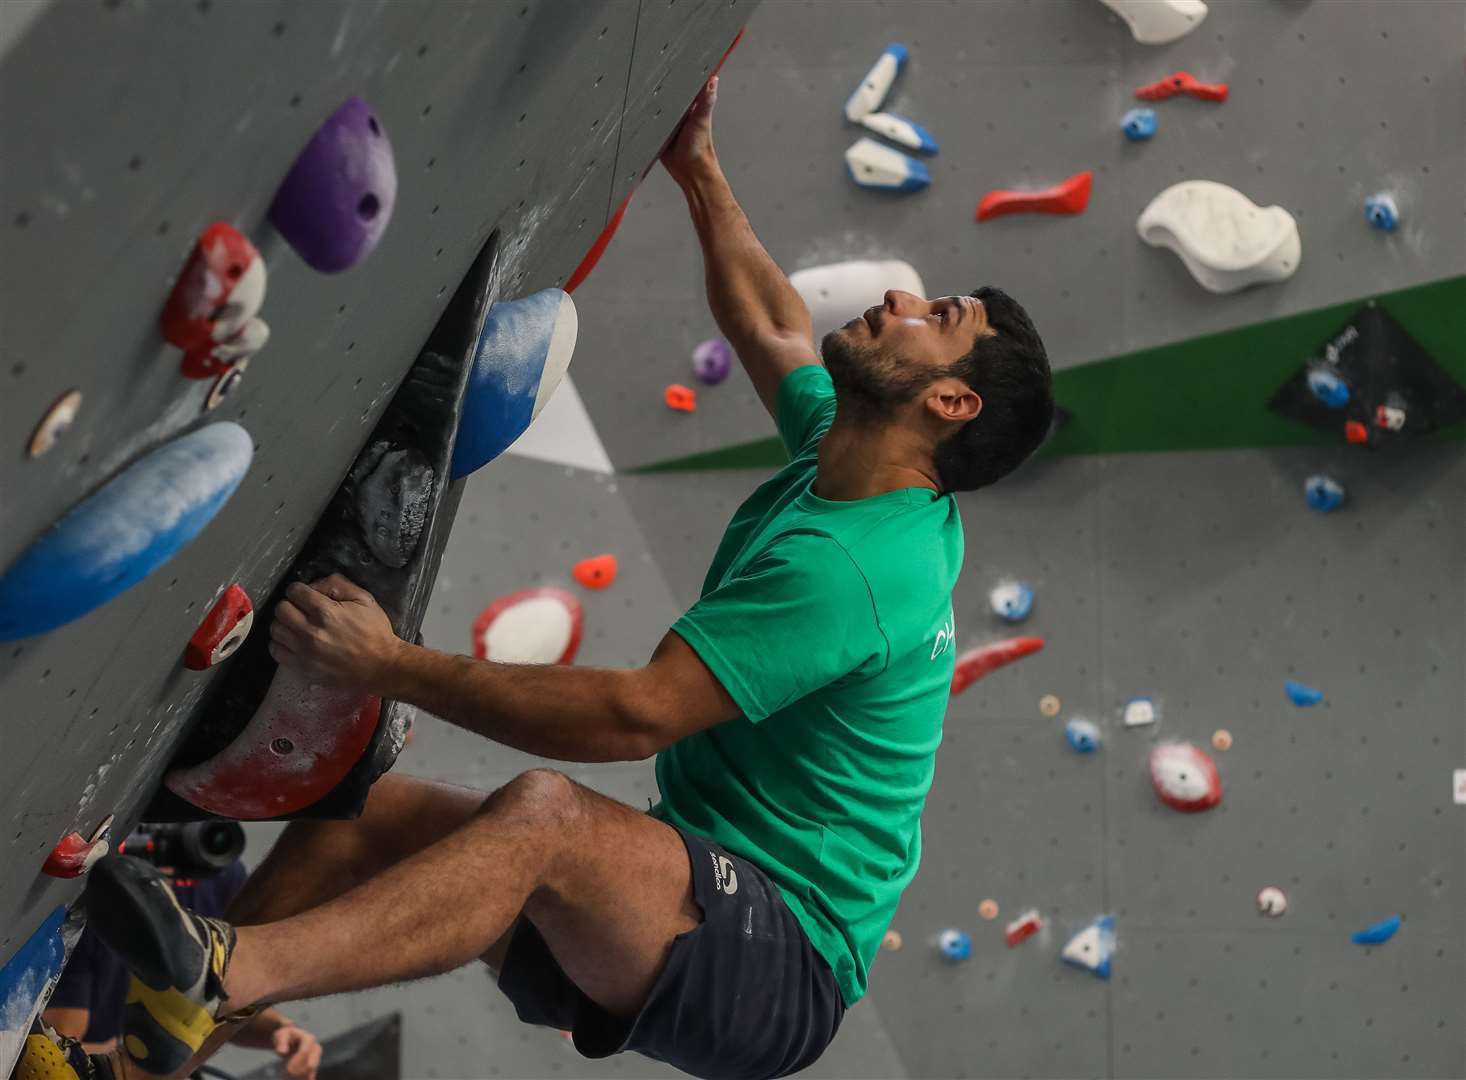 Chimera welcomes climbers of all ages